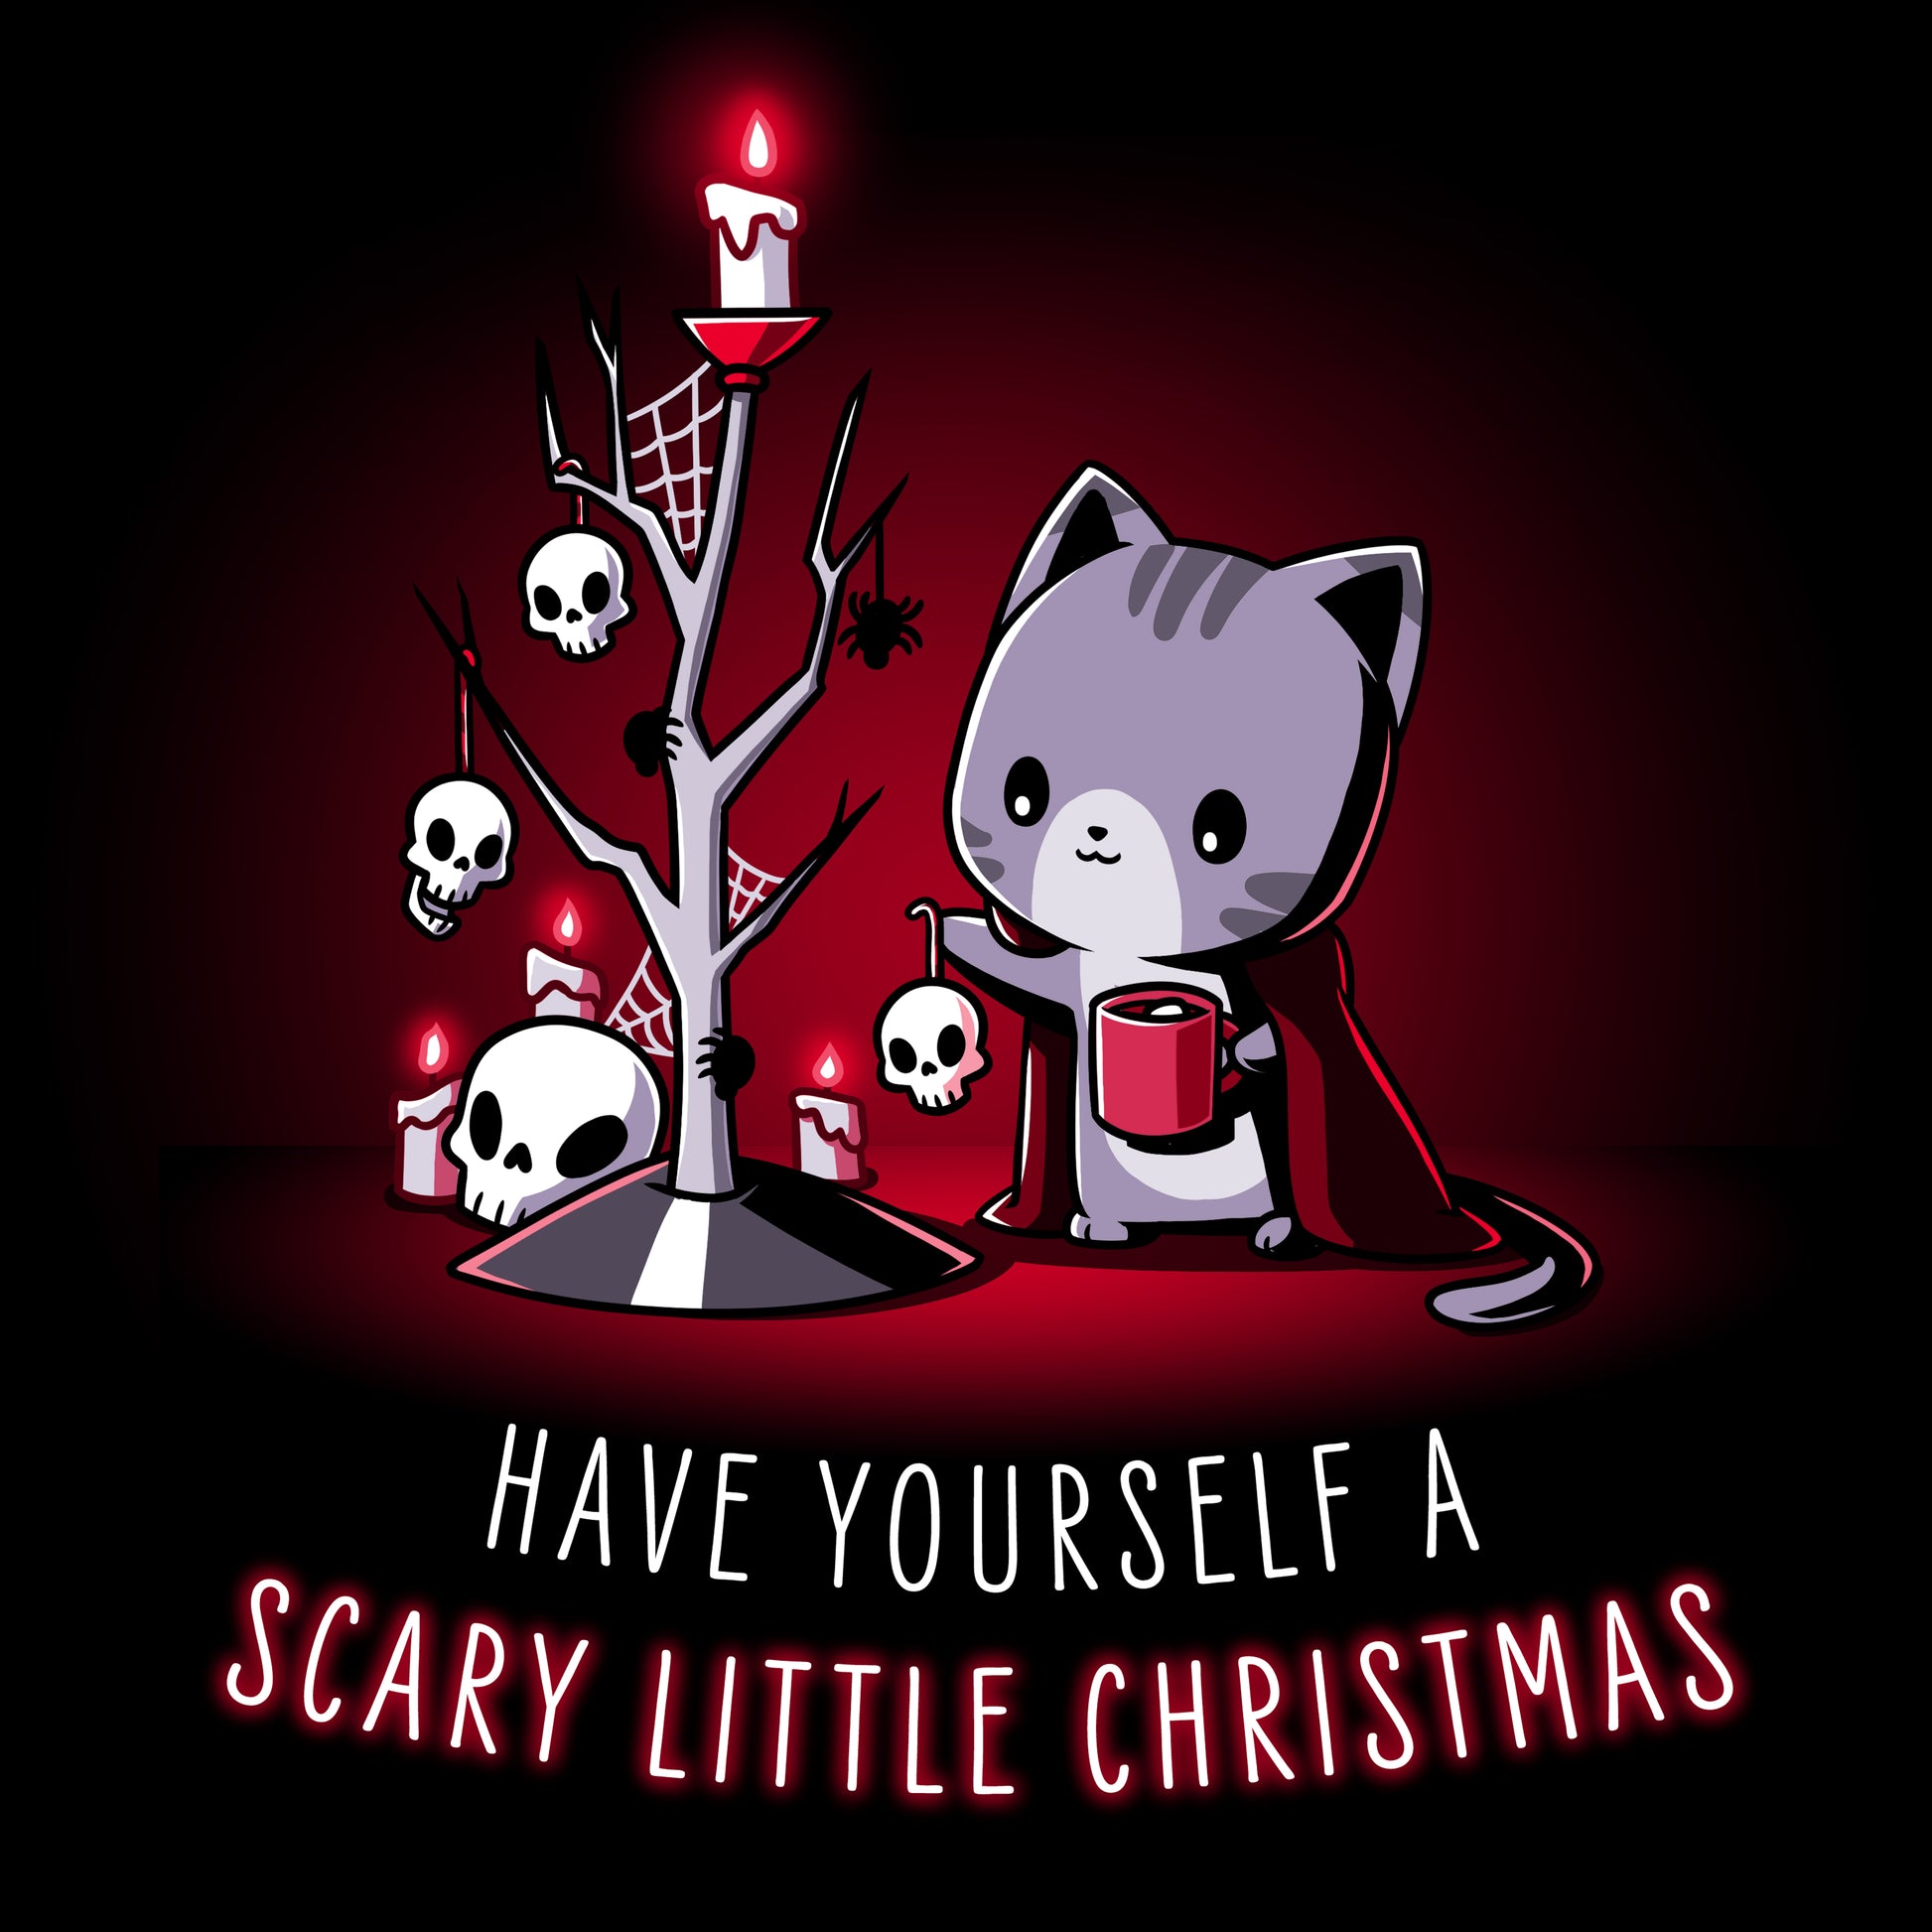 Get ready for a spine-chilling Christmas with TeeTurtle's "Have Yourself a Scary Little Christmas" t-shirt!